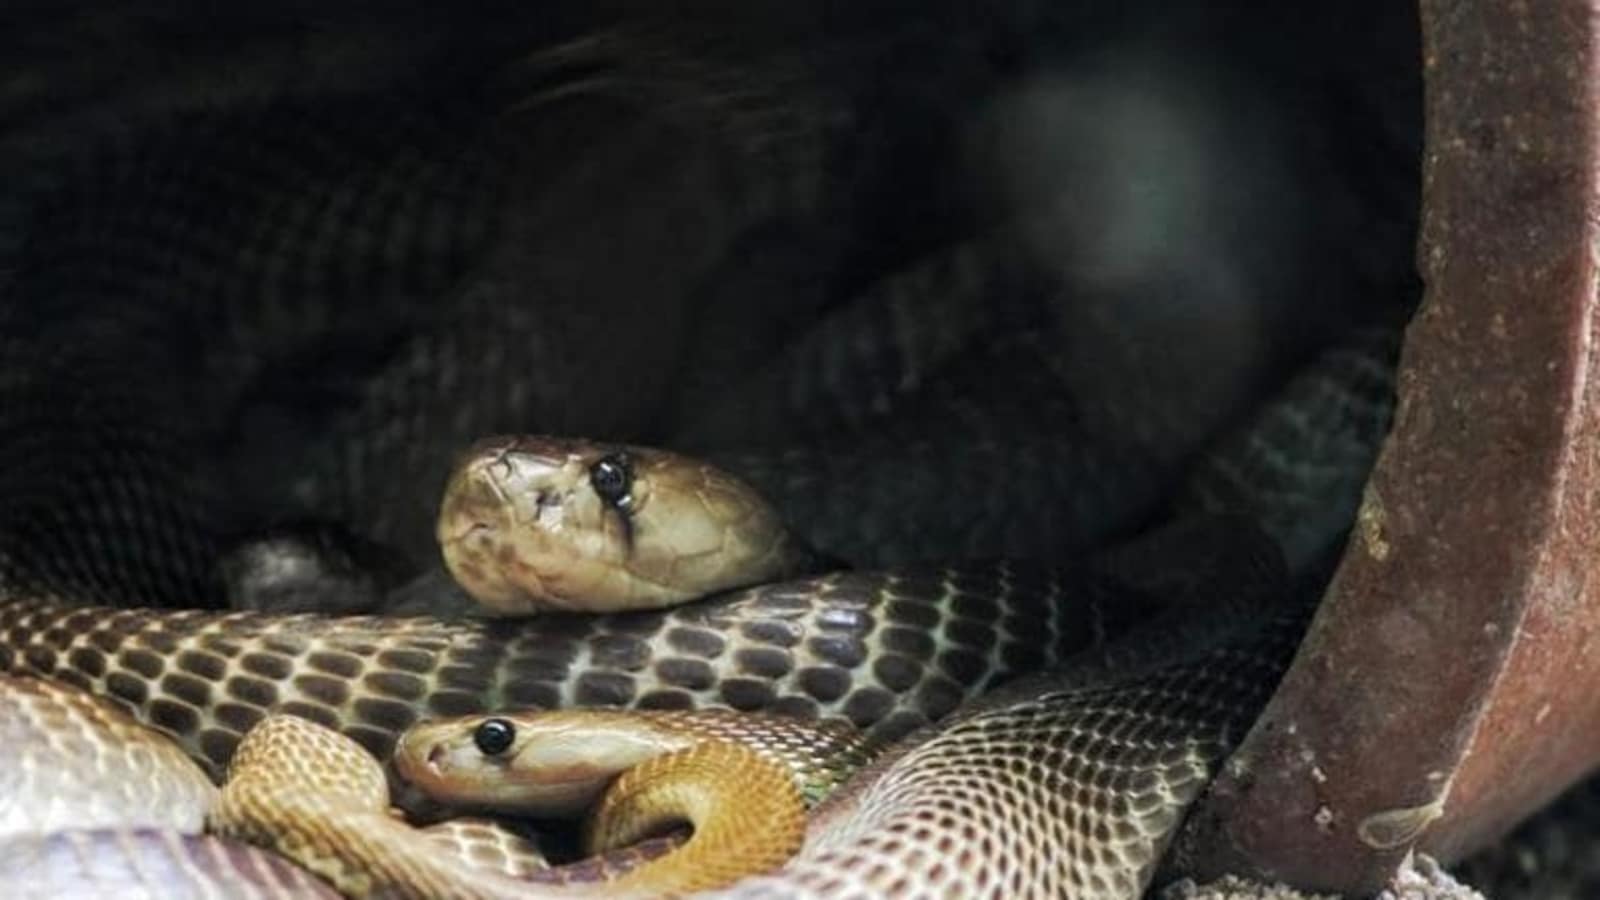 New Research Records 8 More Species Of Snakes In Delhi Number Rises To 23 Latest News Delhi Hindustan Times